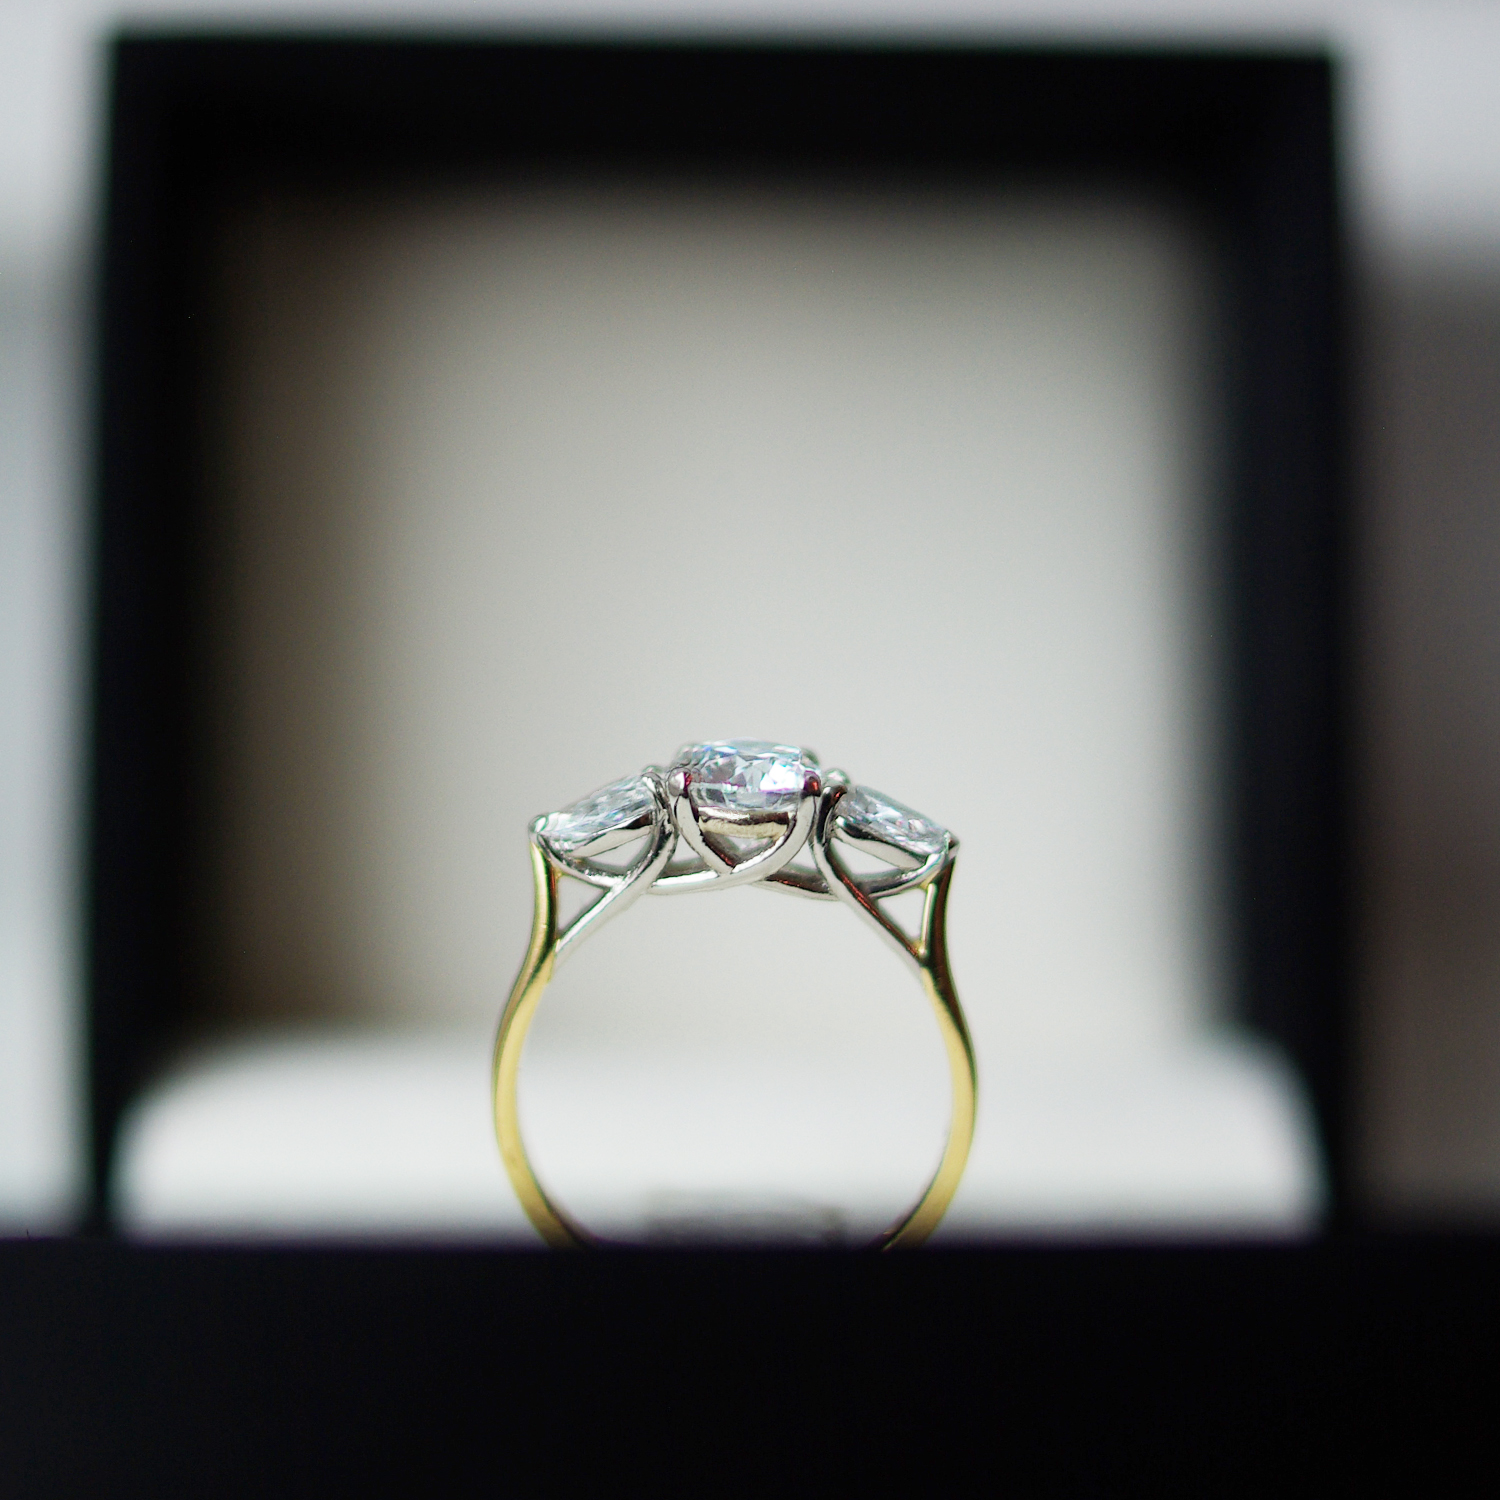 Trilogy Engagement Ring With a Round Brilliant Cut Diamond And Pear Cut Diamond Outers